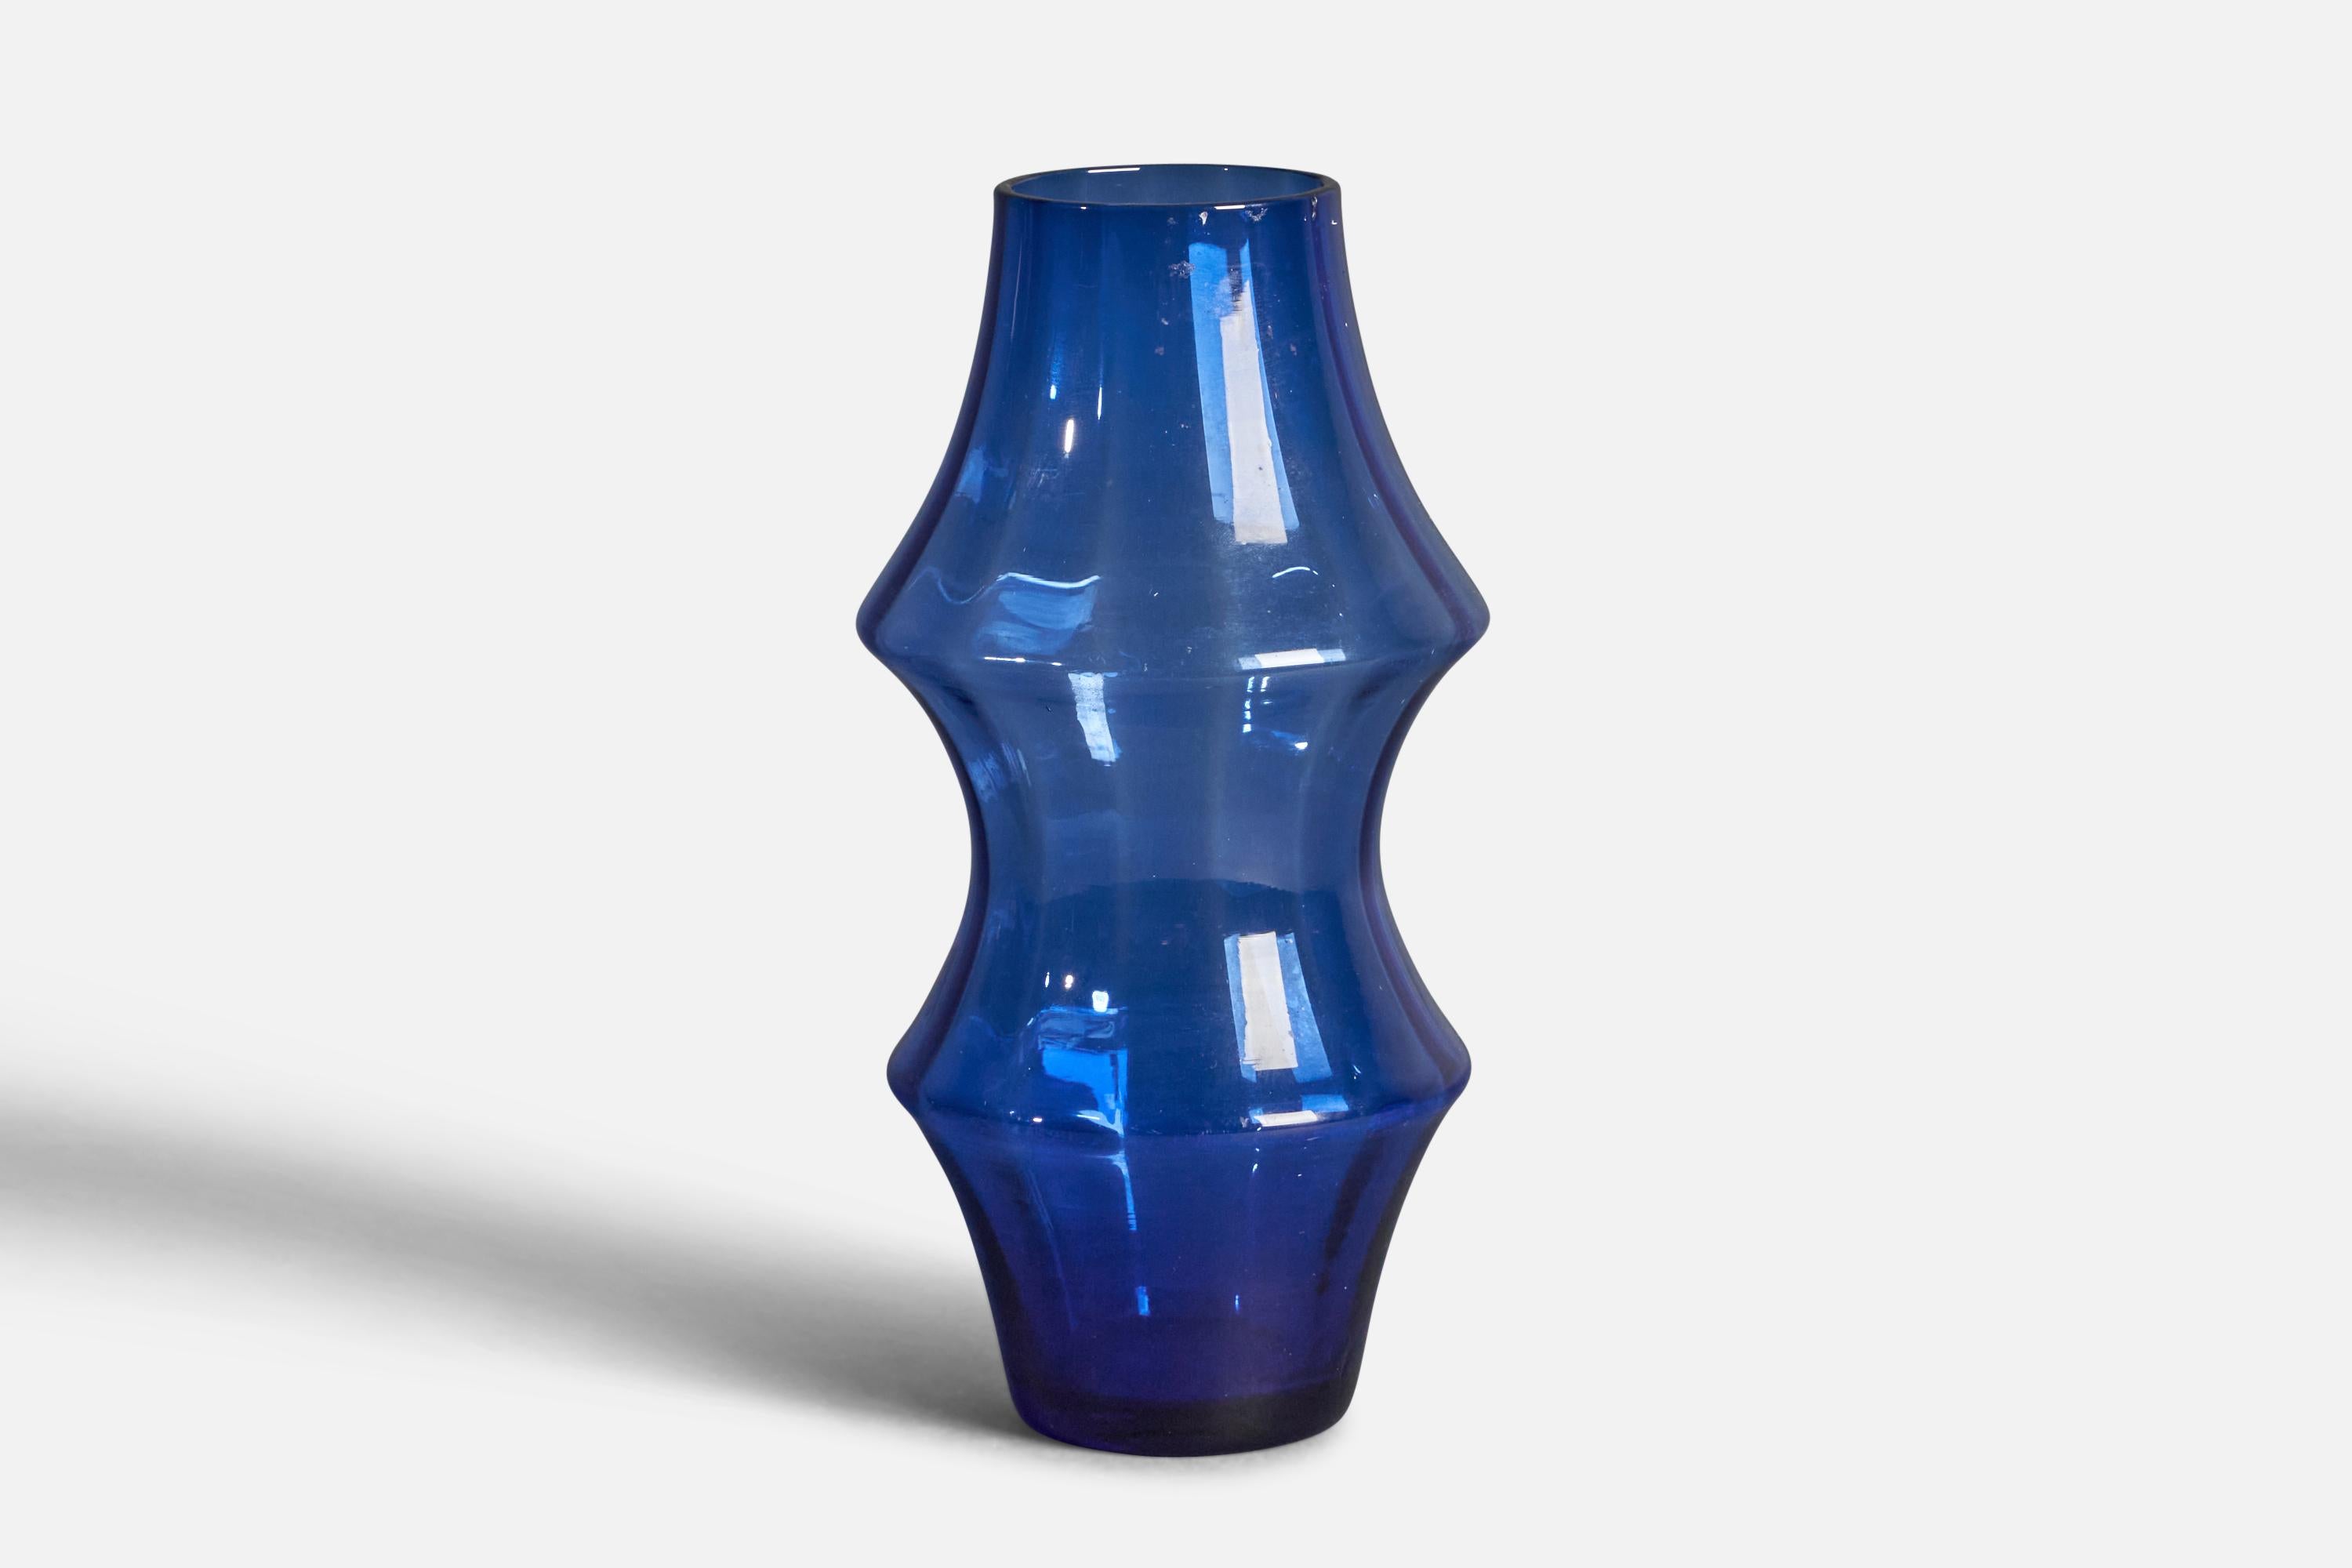 A blue-coloured glass vase designed and produced by Sirkku Kumela, Finland, c. 1960s.